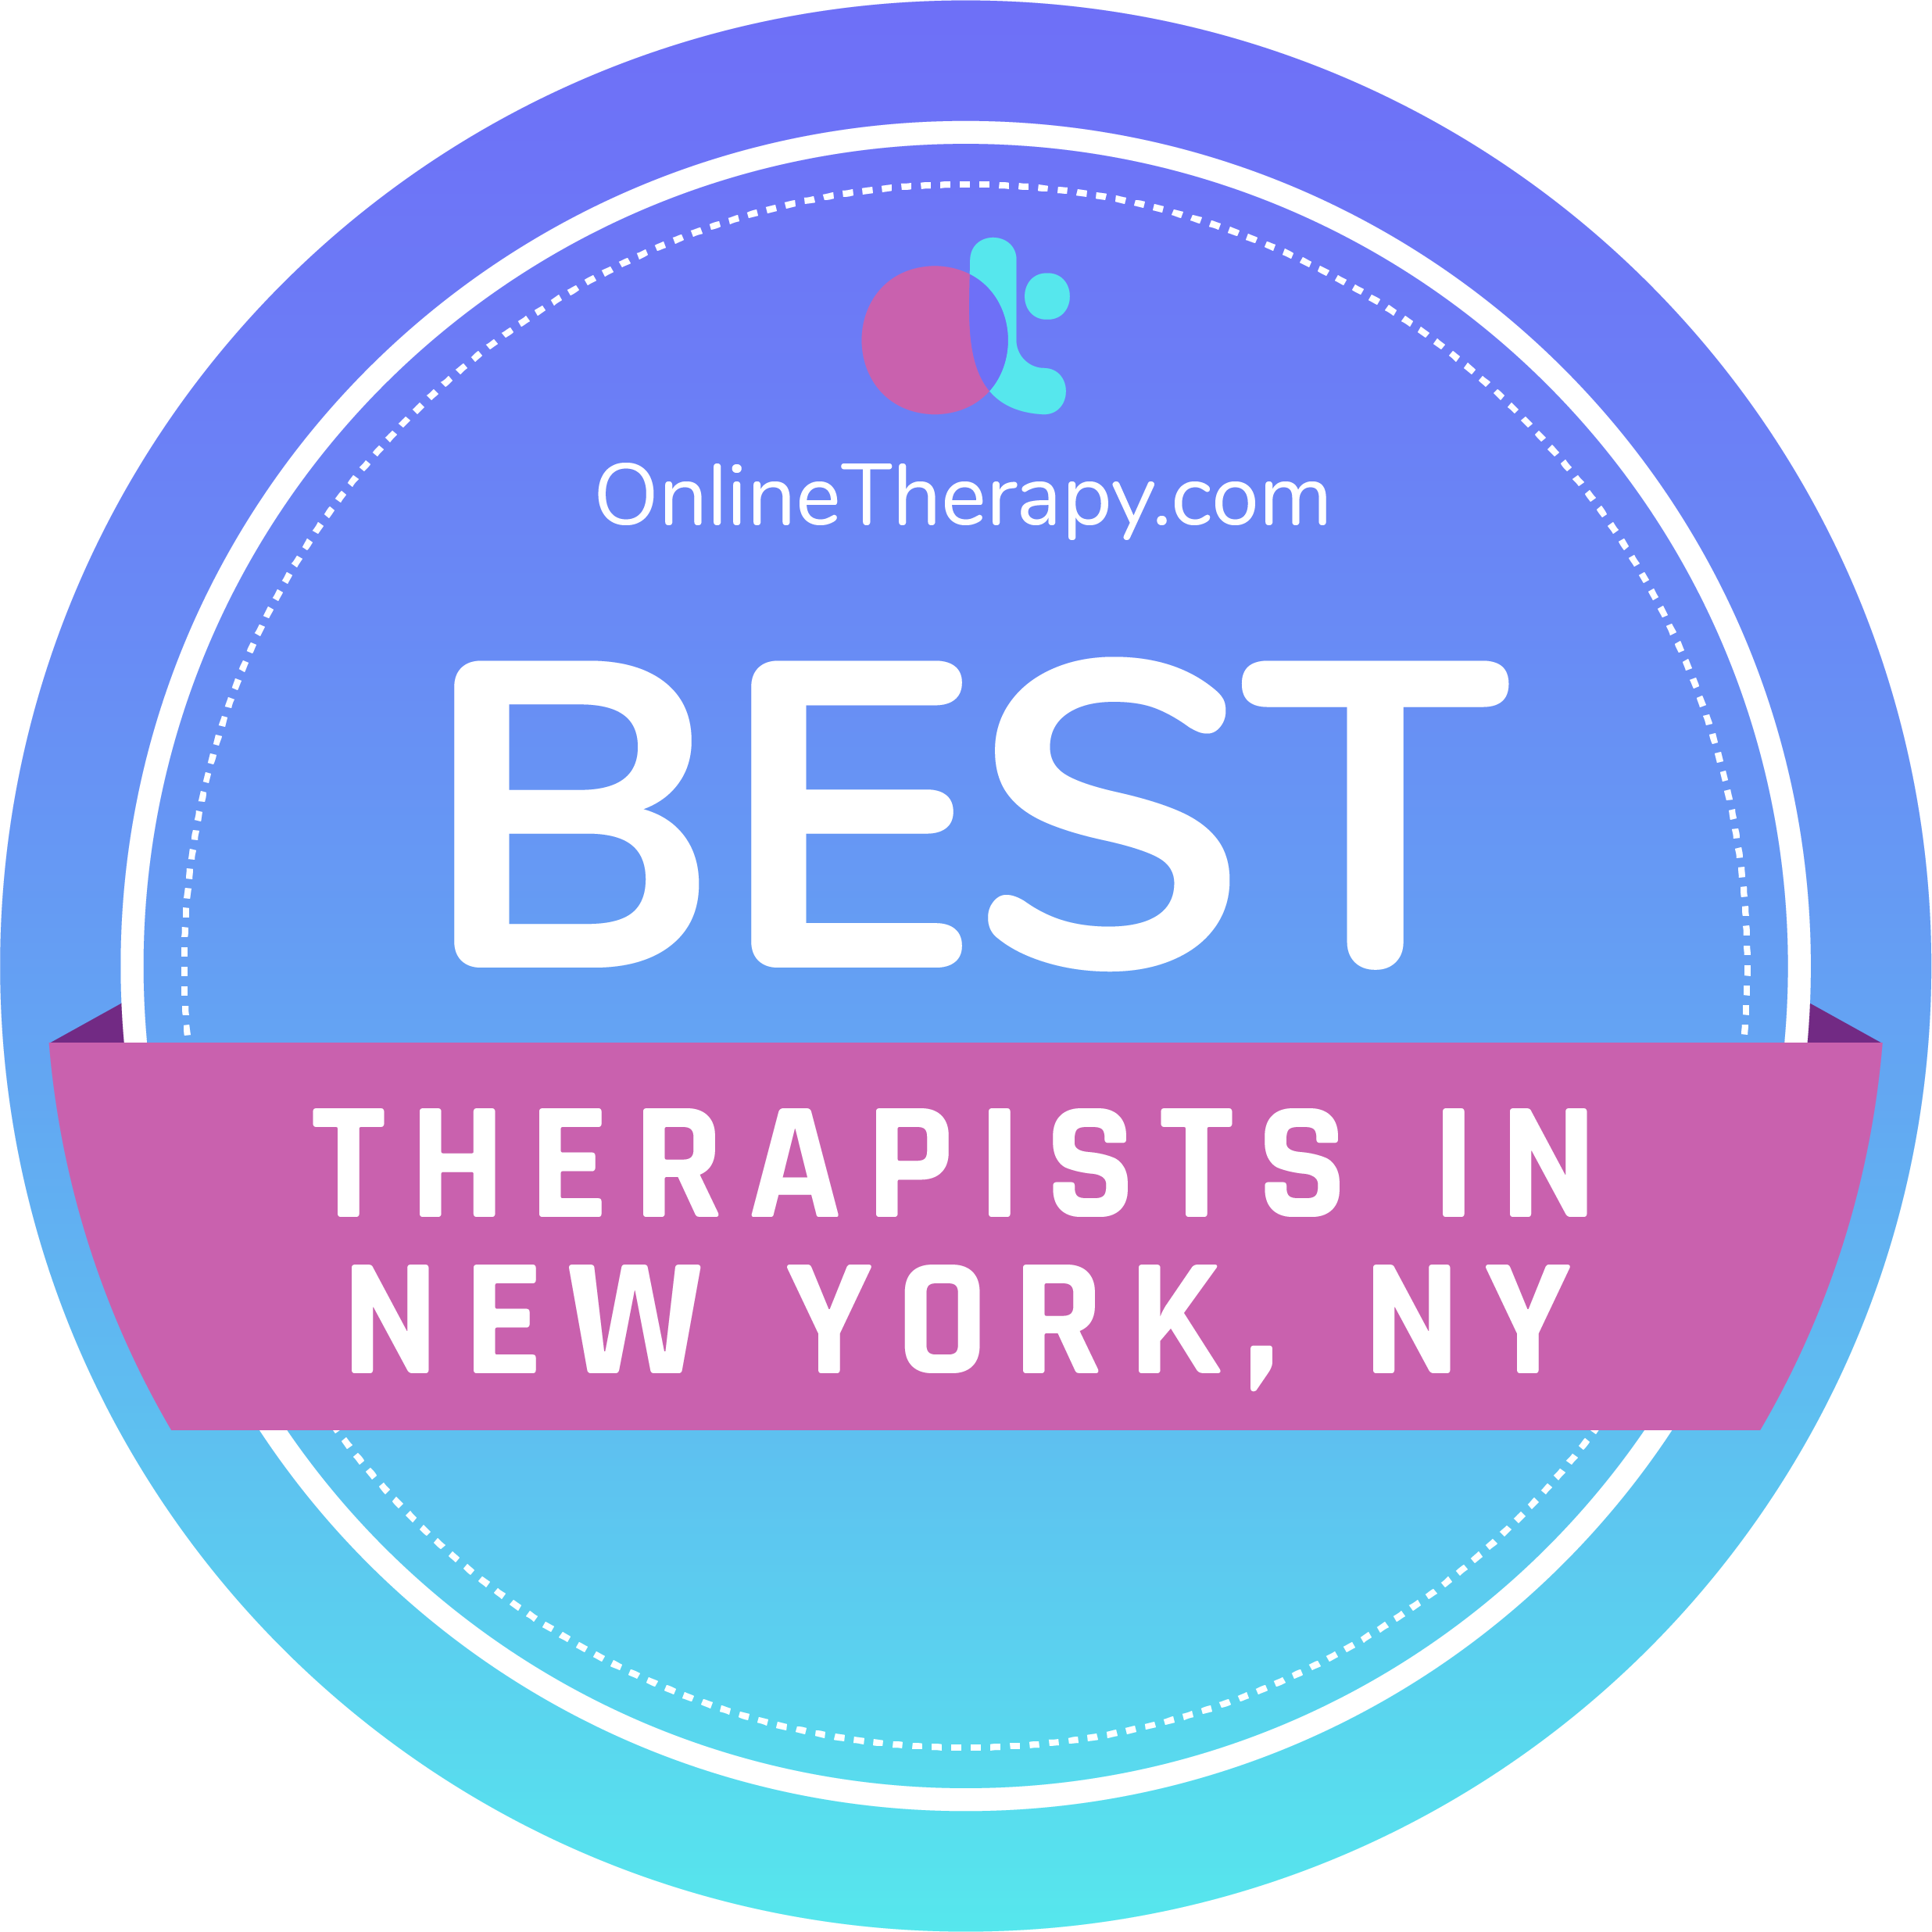 Therapists in NEW YORK, NY Badge